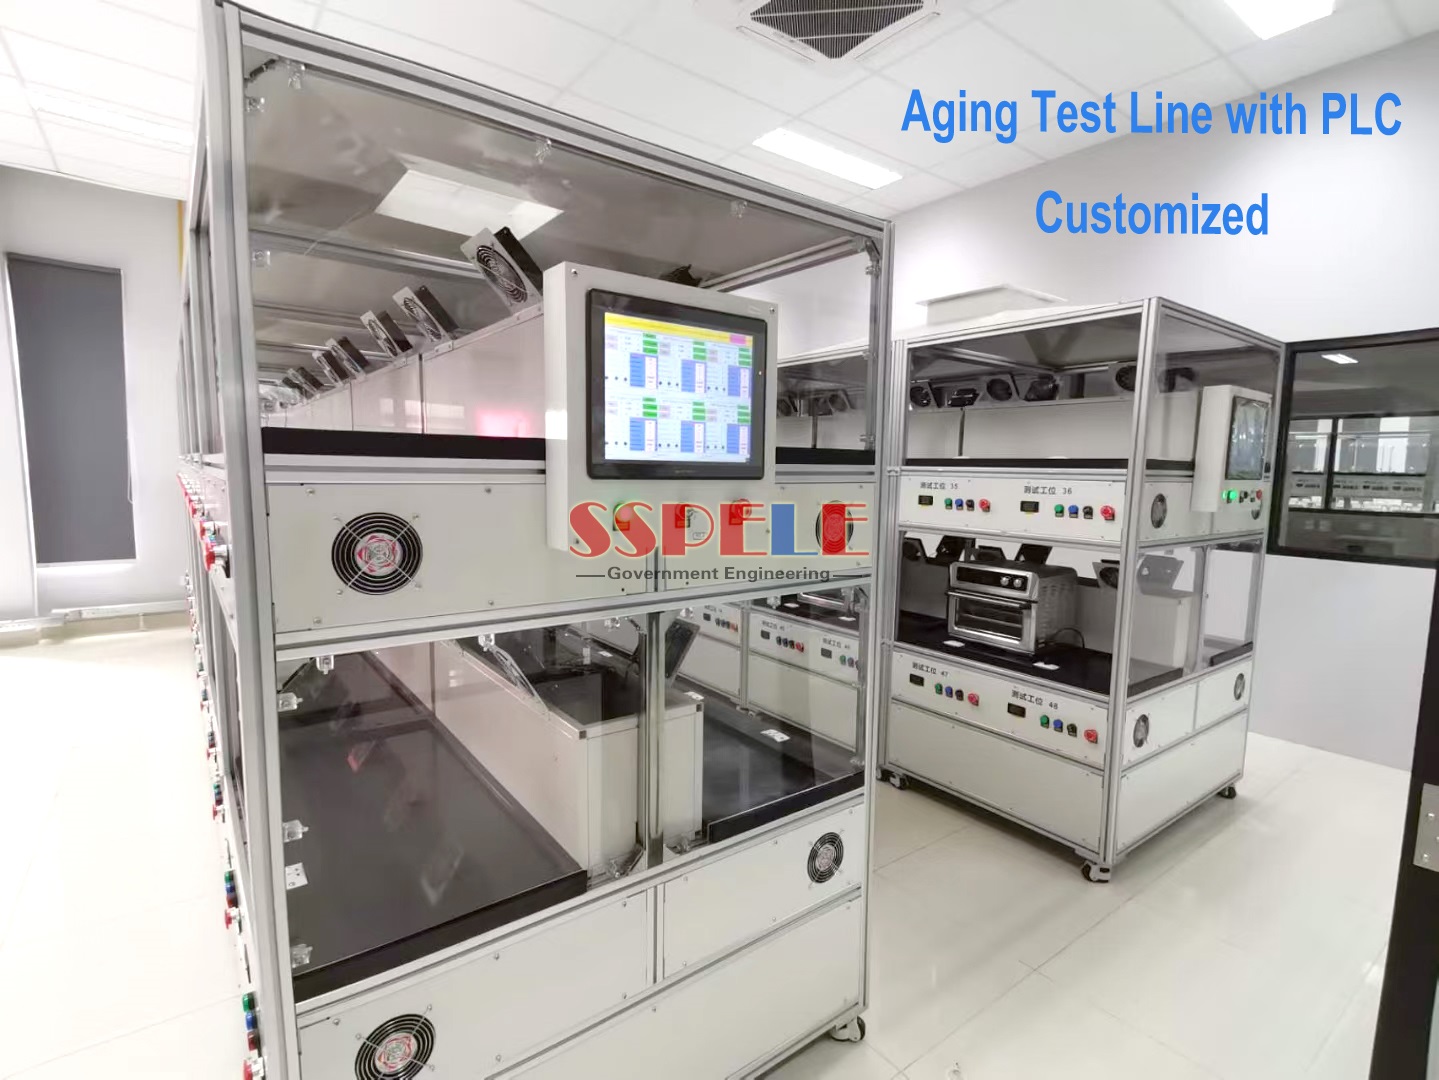 Kitchen Appliances Aging Test Line Equipment with PLC Customized Design